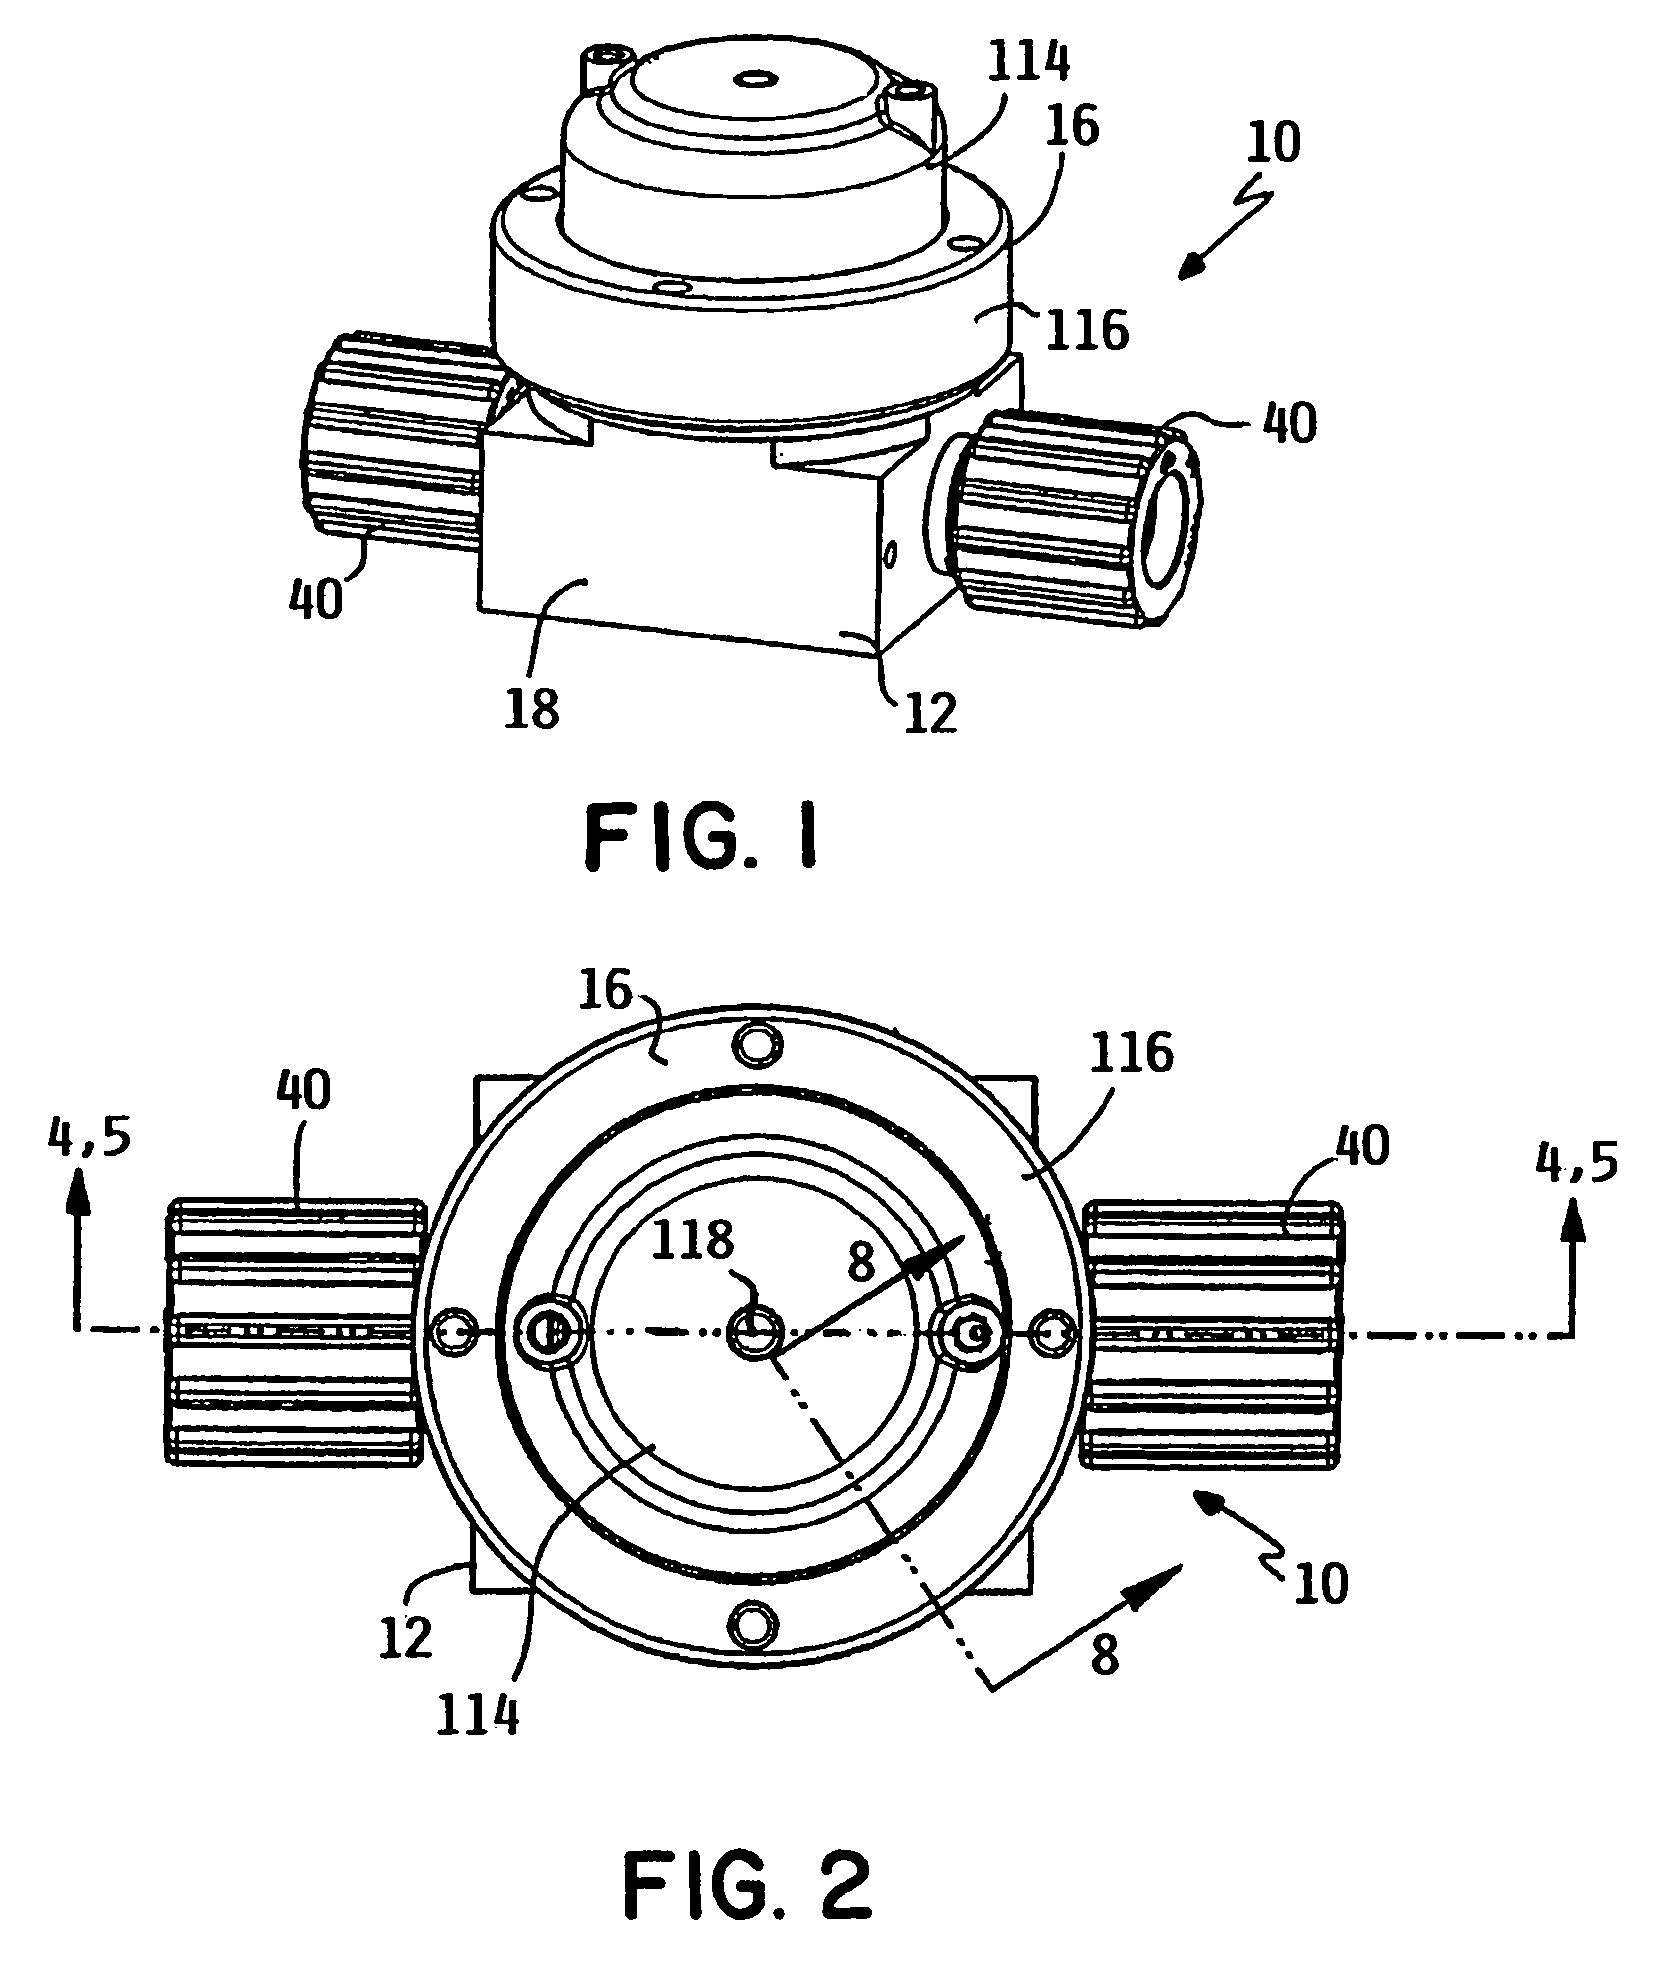 Extended stroke valve and diaphragm